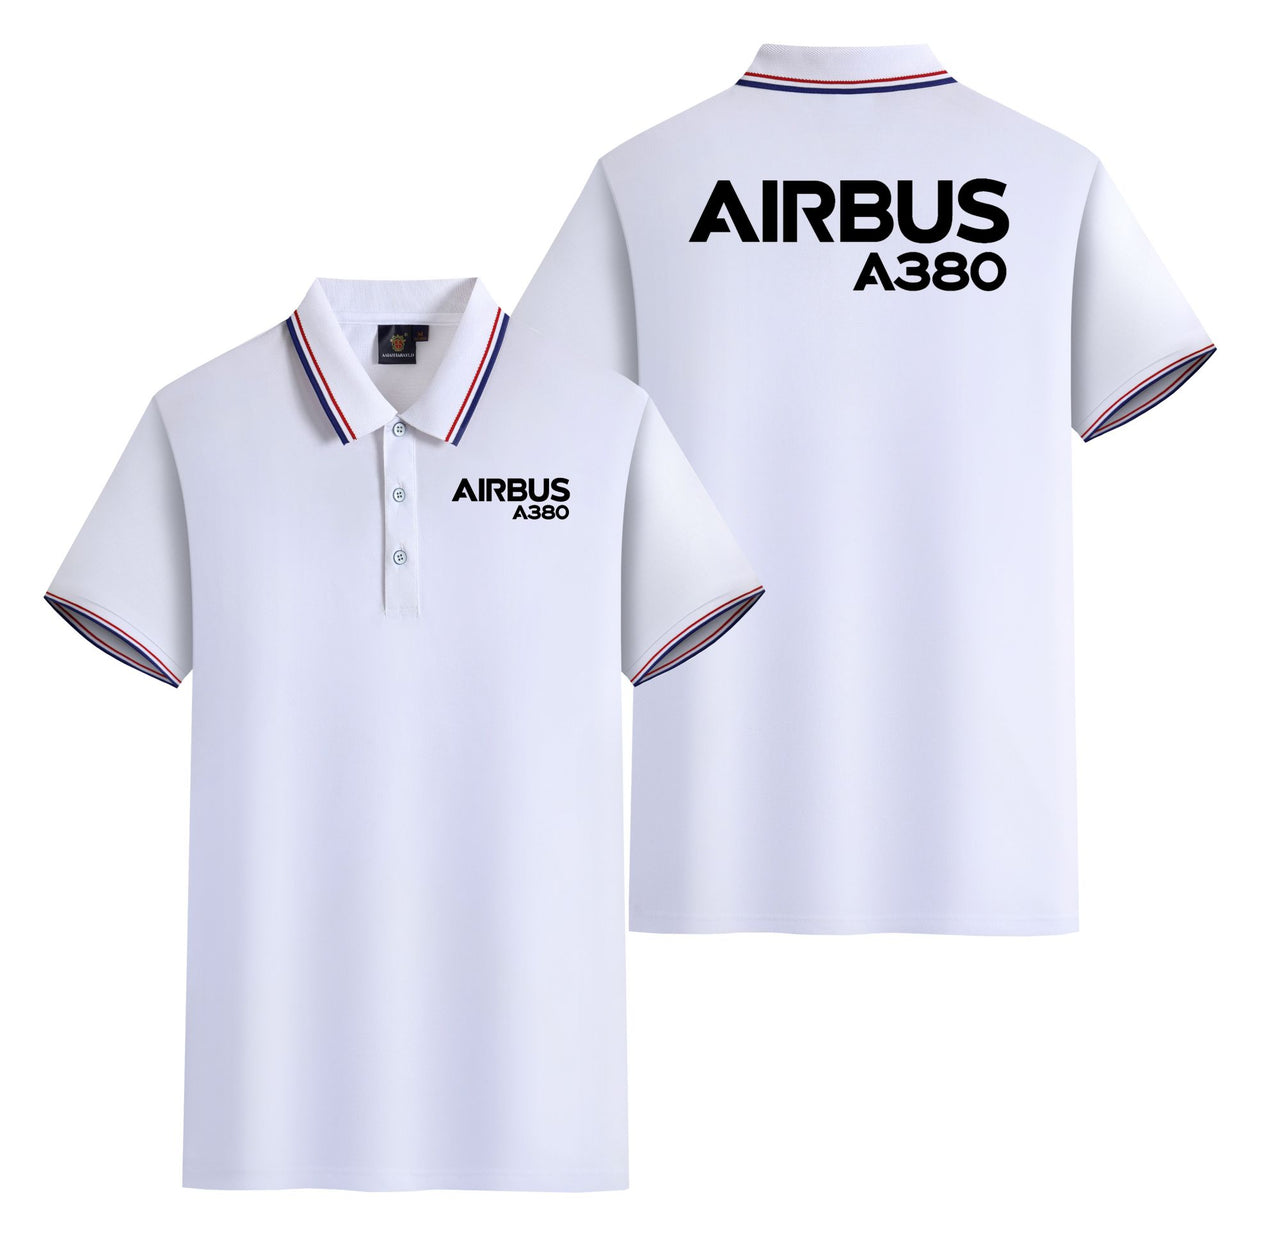 Airbus A380 & Text Designed Stylish Polo T-Shirts (Double-Side)